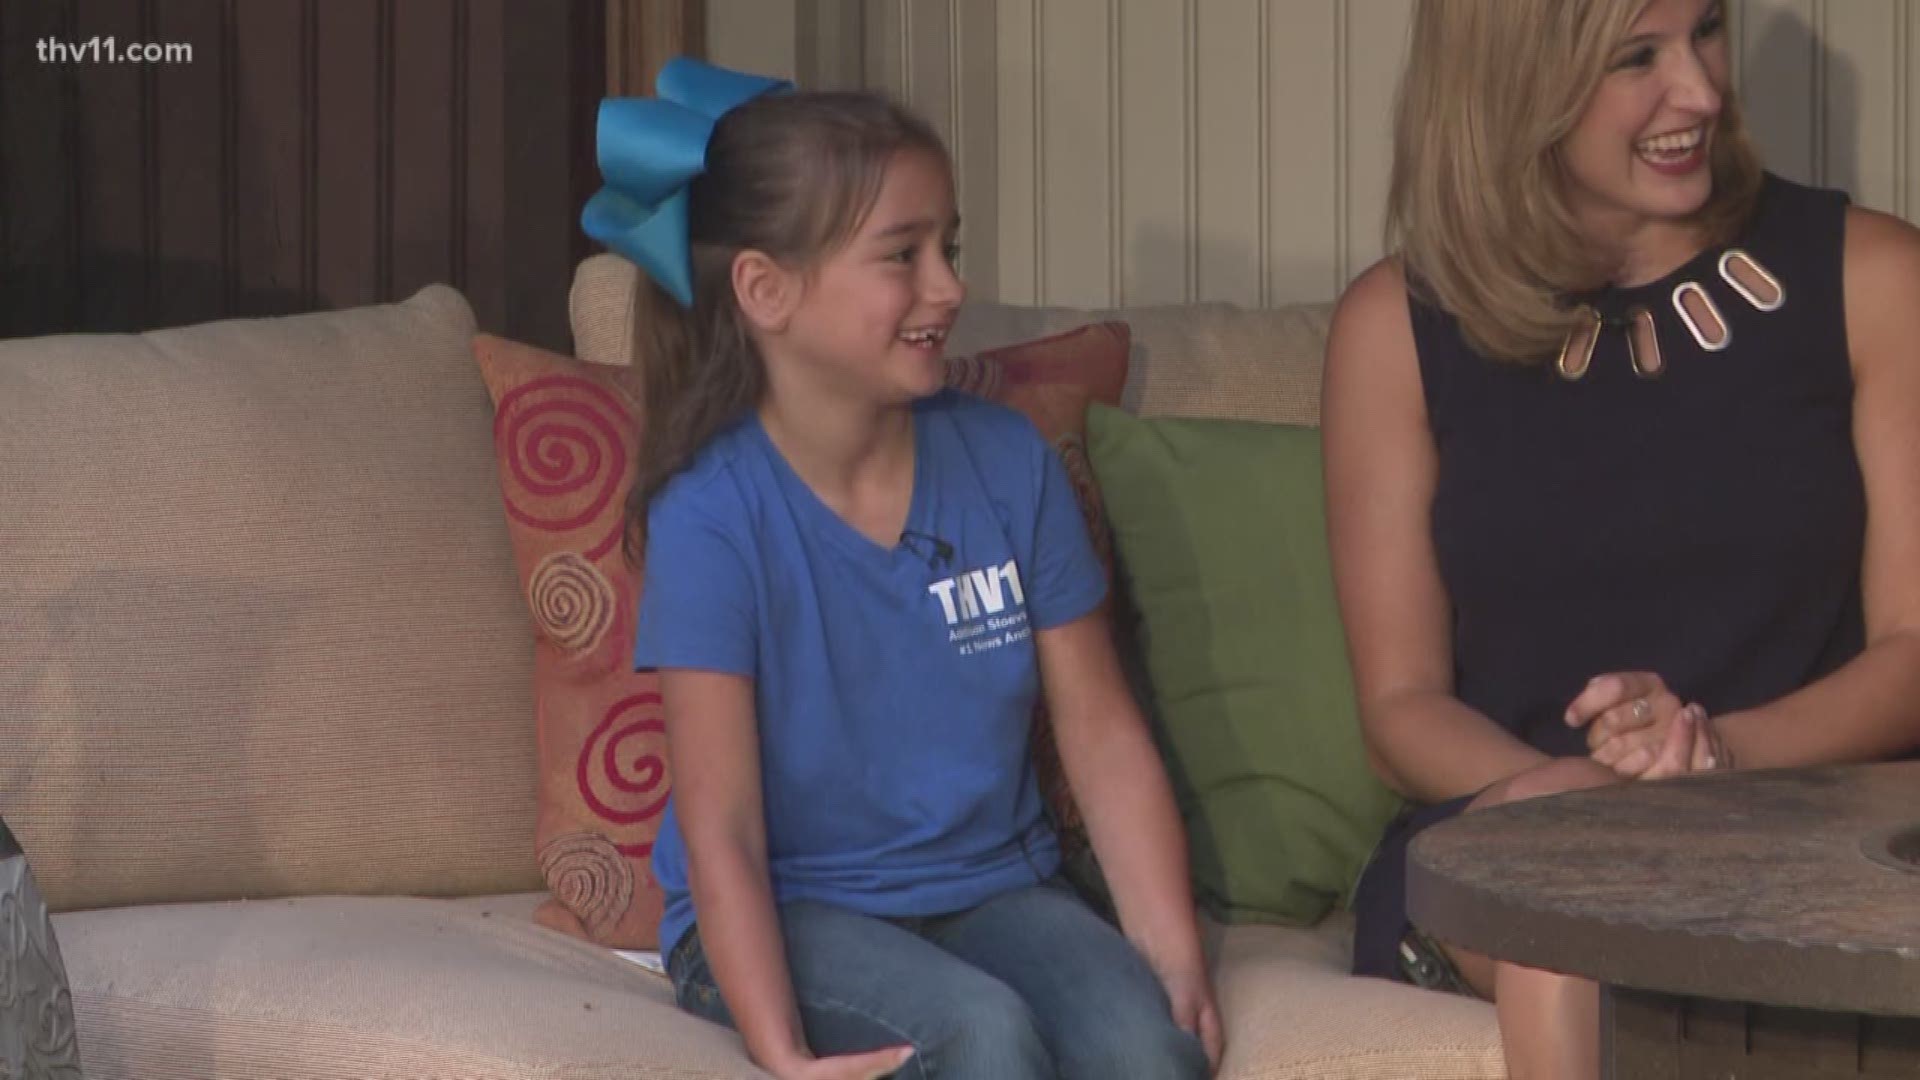 Addison is an 8-year-old girl who has her sights set on Amanda Jaeger's job.